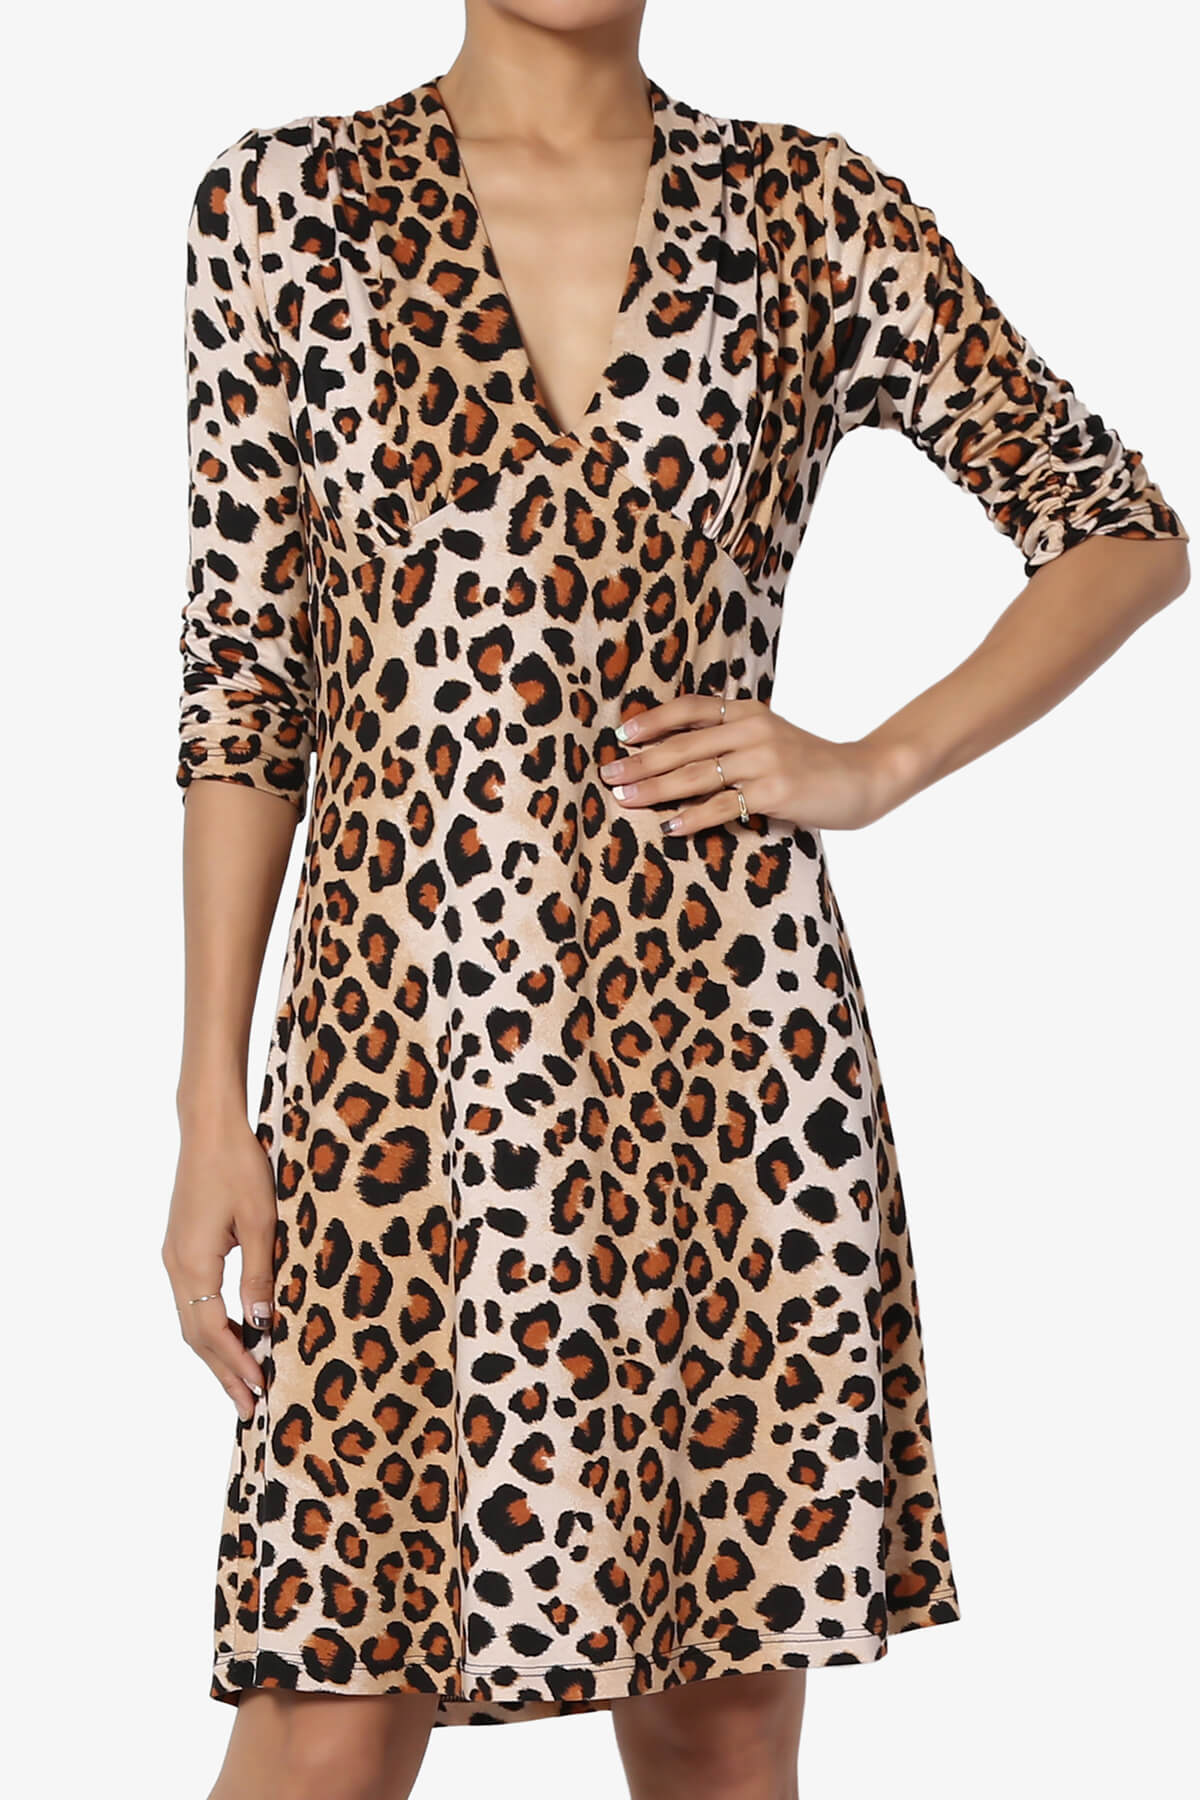 TheMogan S~3X Leopard Print Ruched 3/4 Sleeve V-Neck Fit & Flare ...